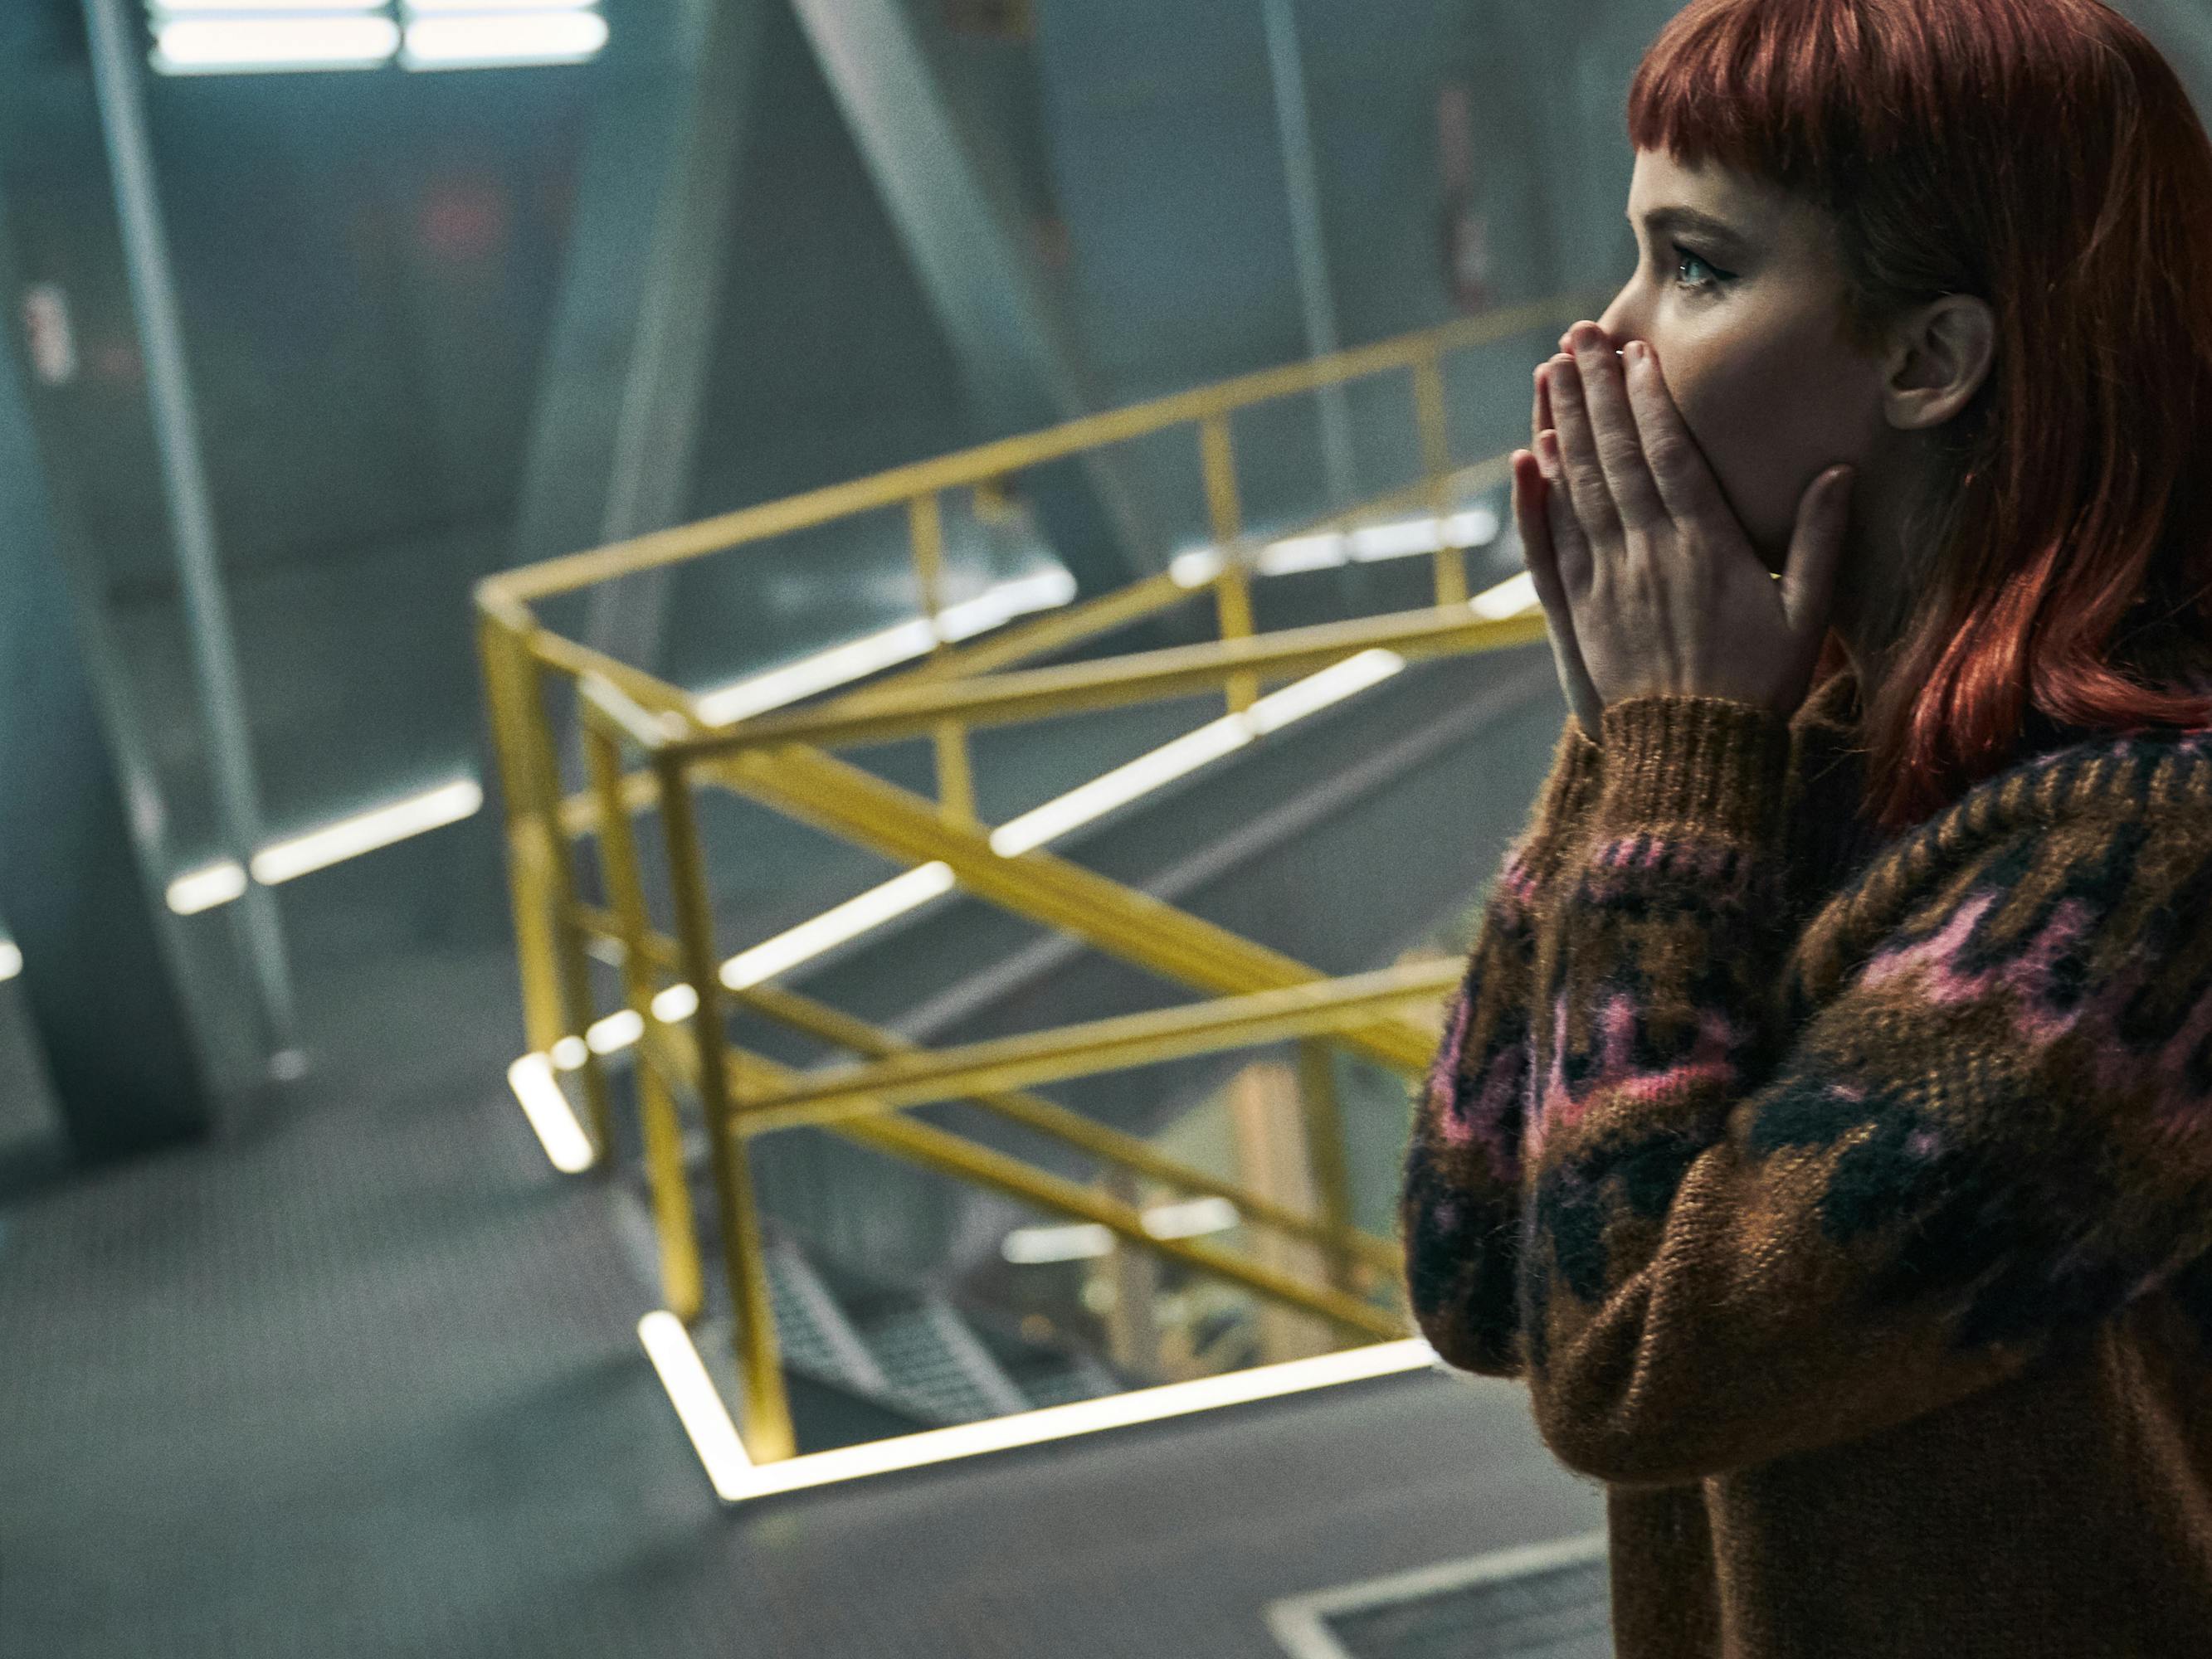 Jennifer Lawrence wears a patterned sweater and red wig, covering his mouth with her hands in shock.